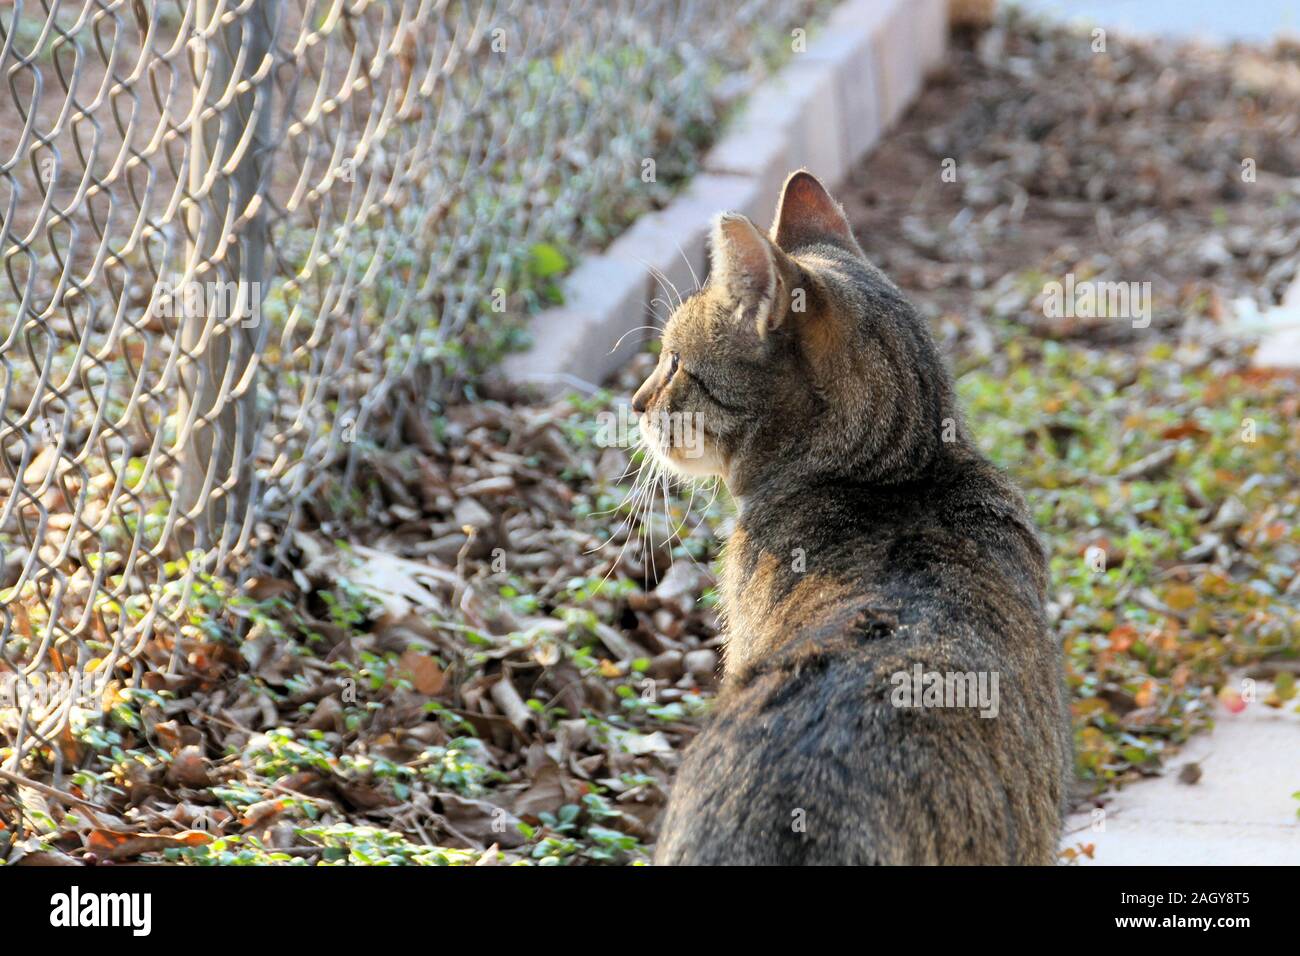 A neutered male community cat looks through a chain link fence, facing away from the camera. Stock Photo